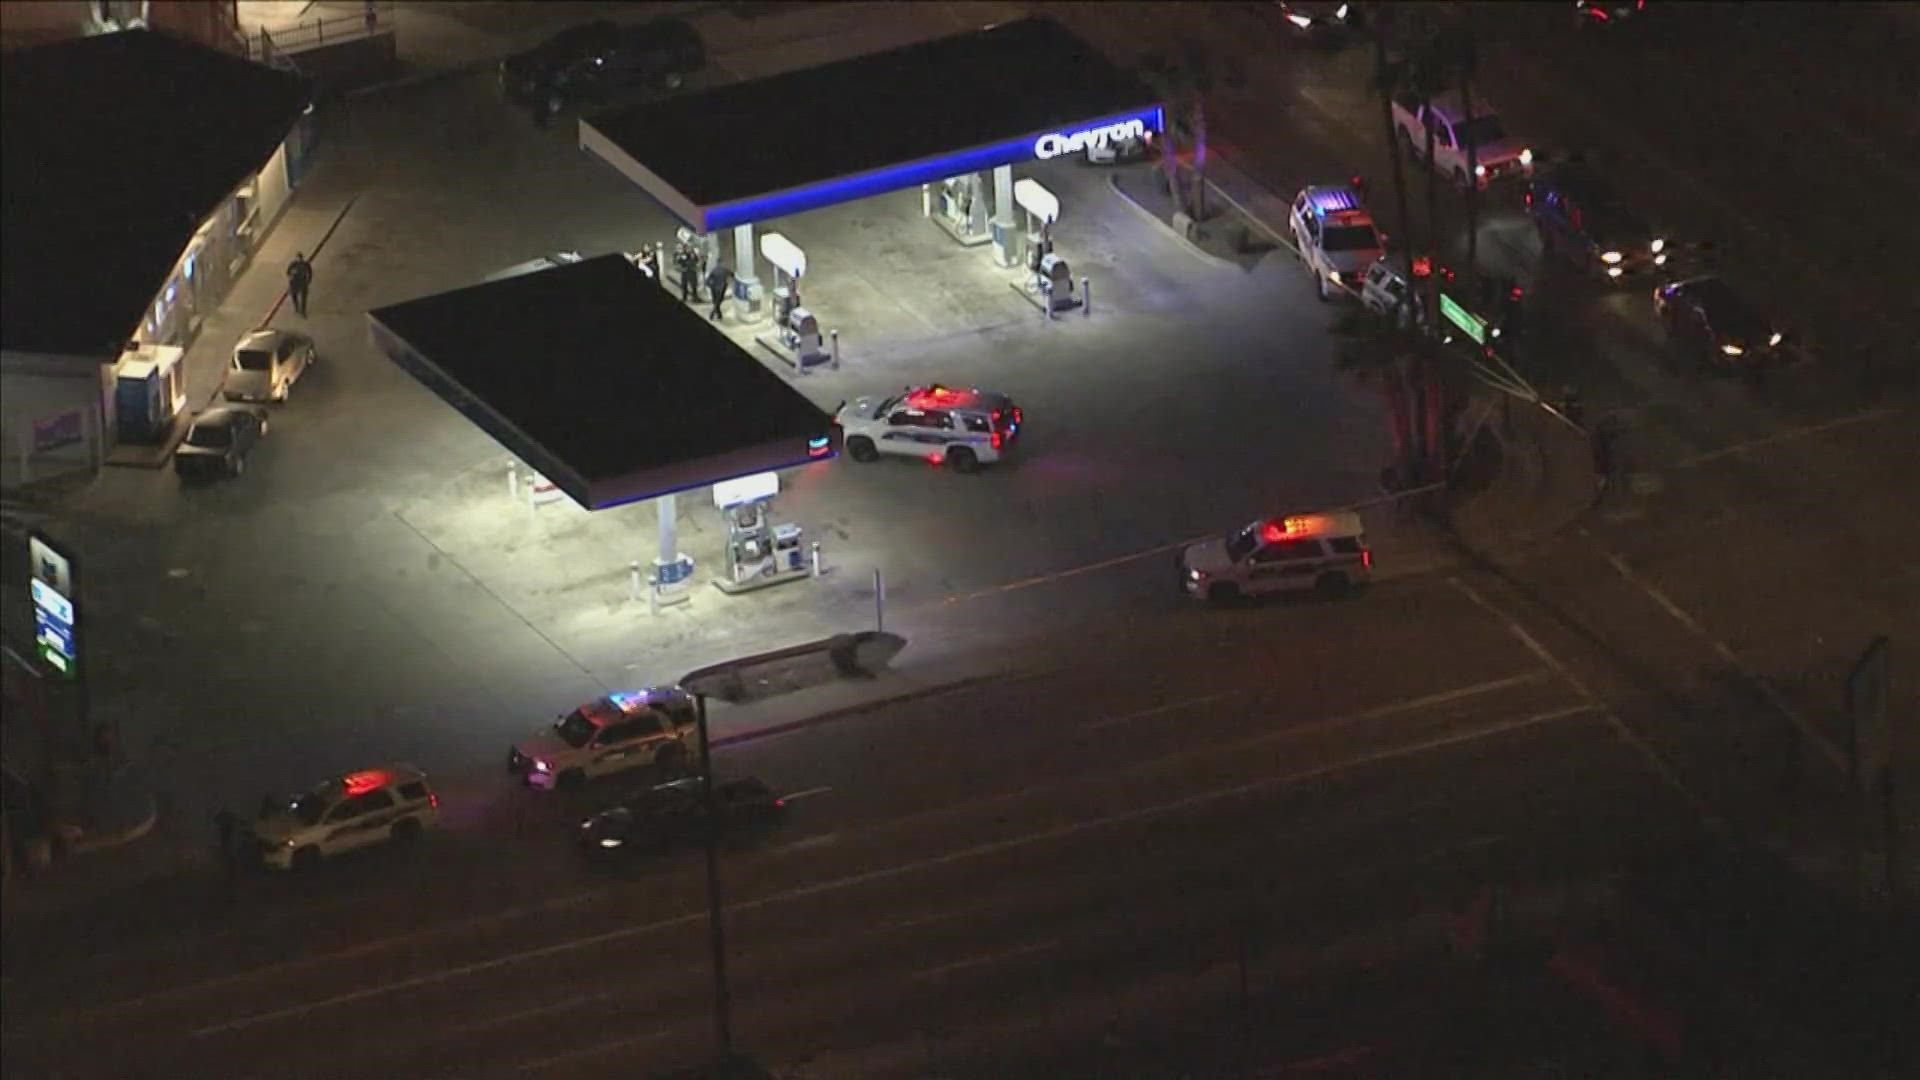 Police are investigating after a man was shot and killed at a gas station near 35th Avenue and Camelback Monday night.